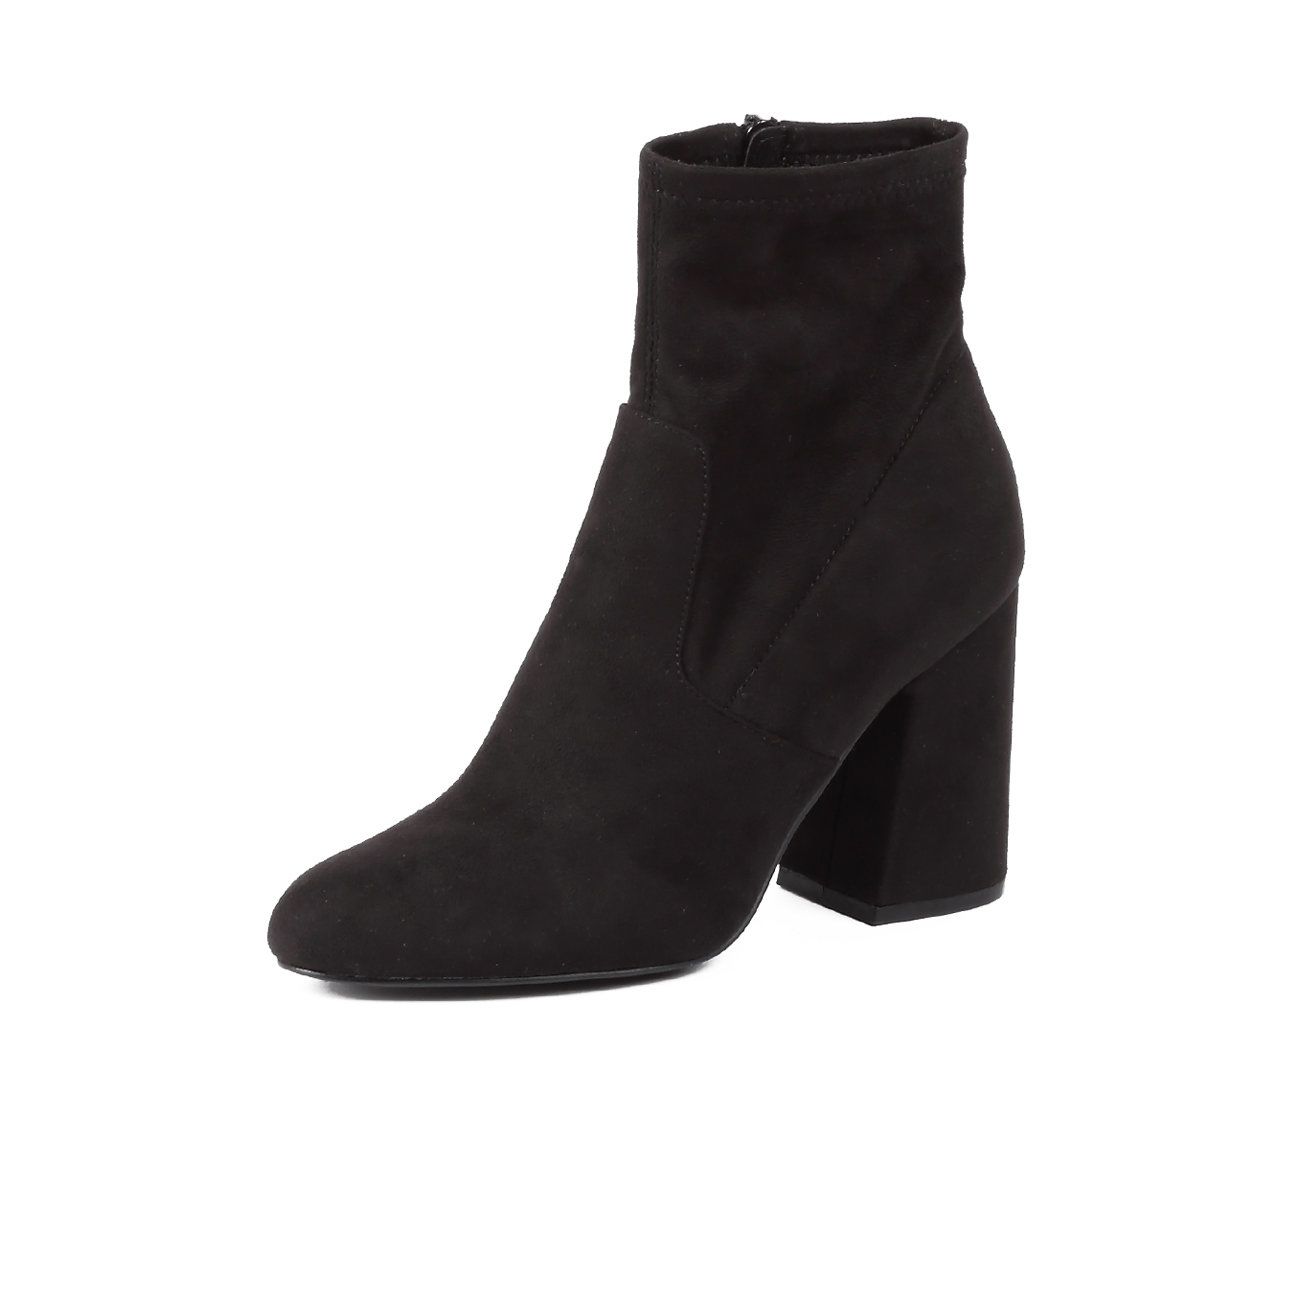 Steve Madden High Heel Ankle Boots Wholesale Cheap, Save 52% | jlcatj ...